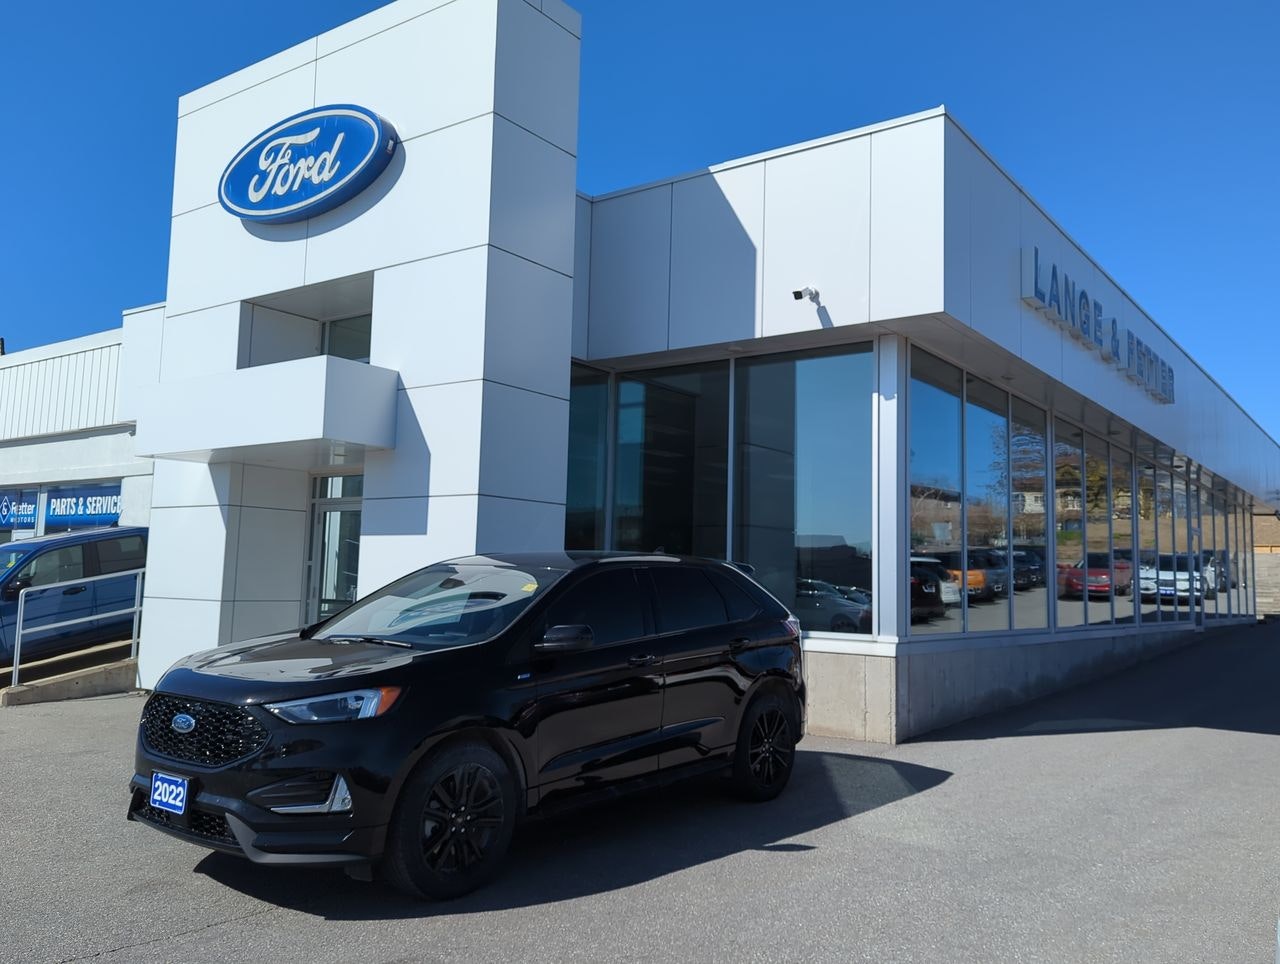 2022 Ford Edge - P21728A Full Image 1